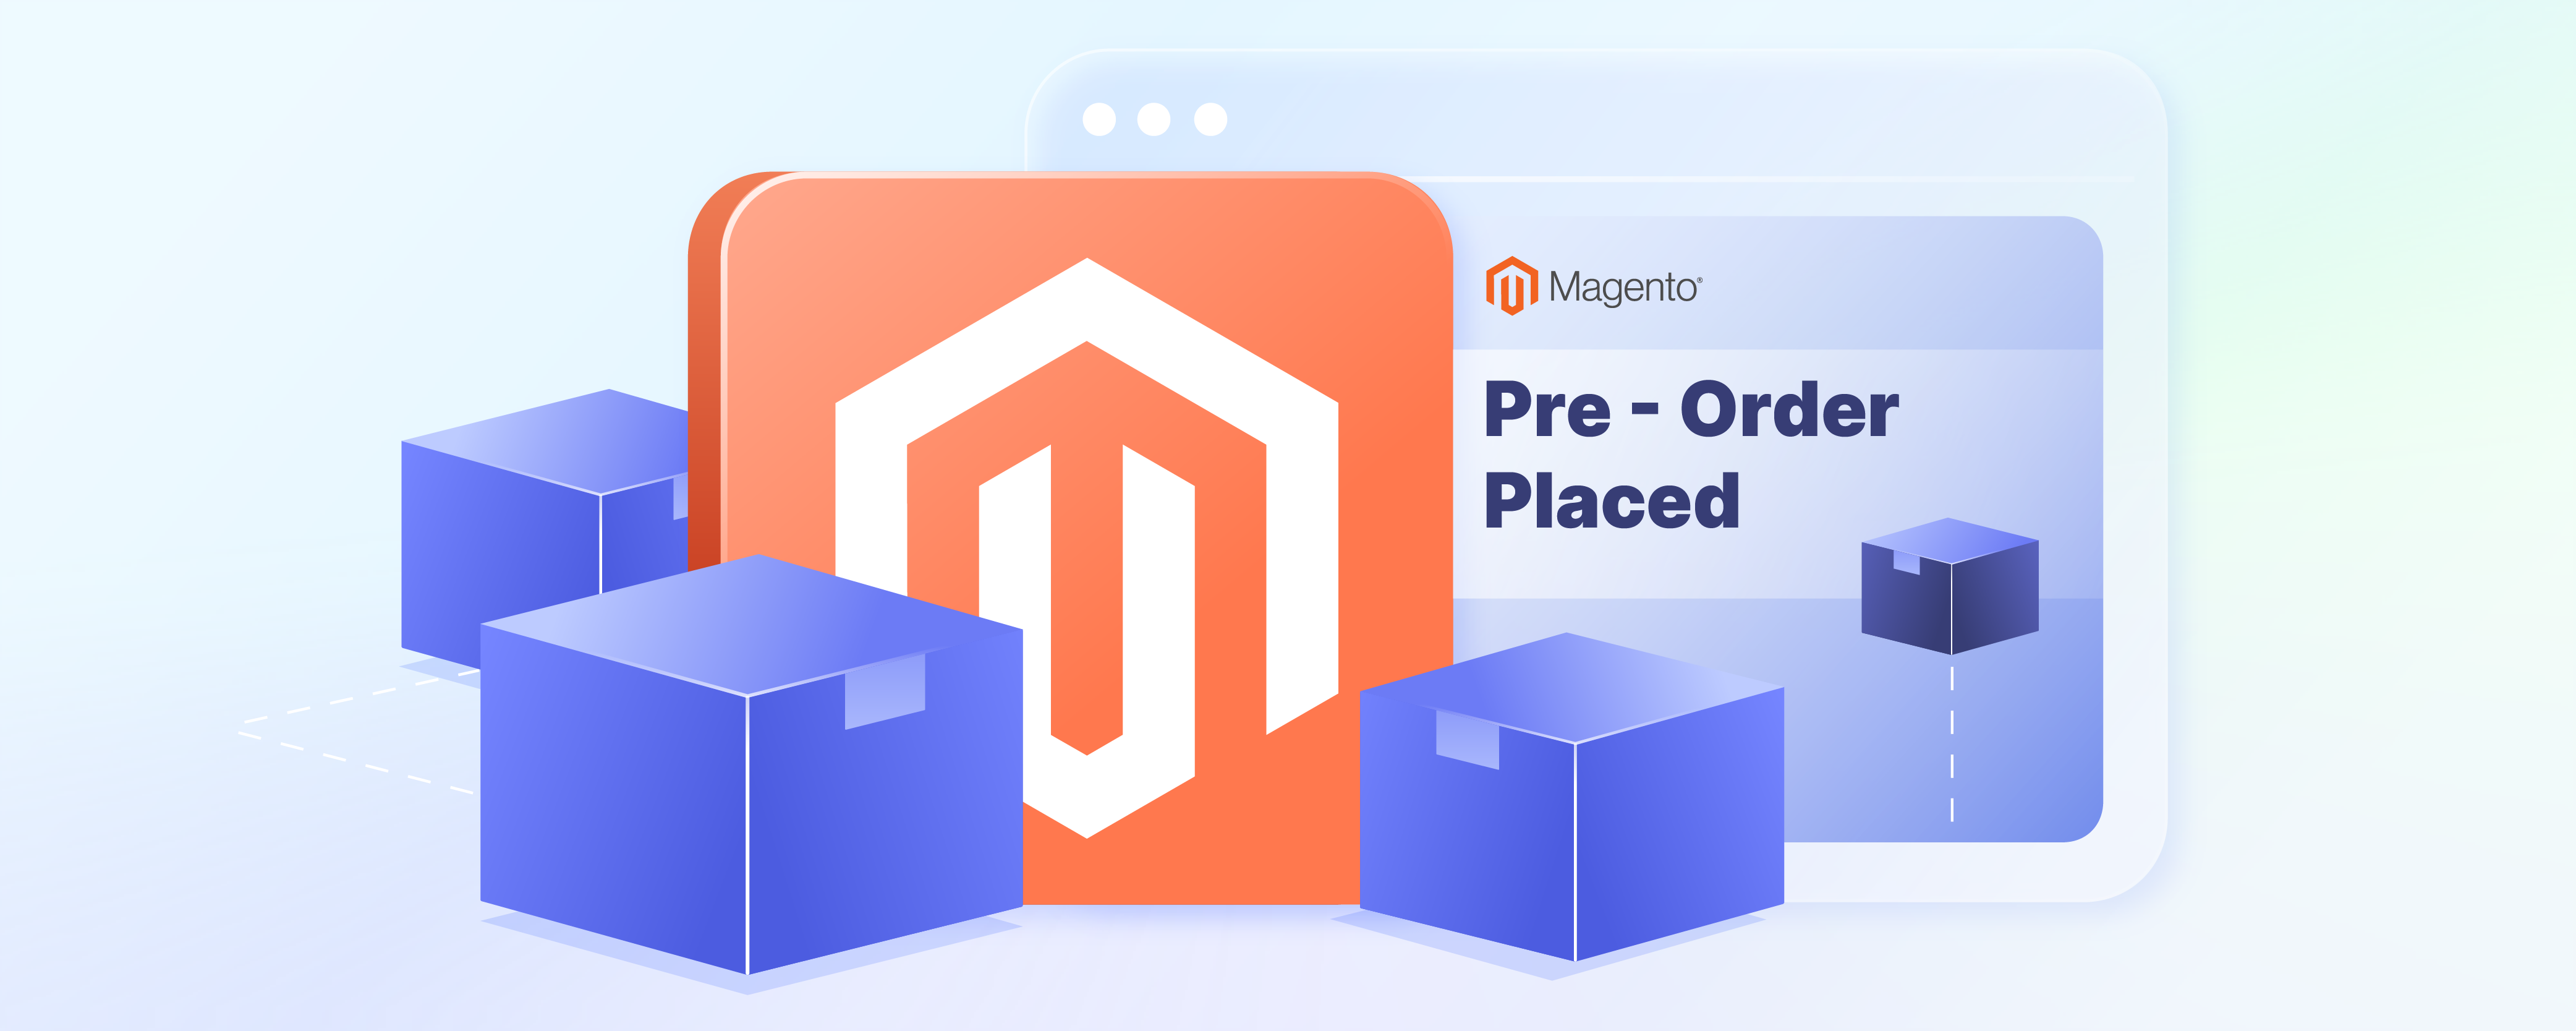 Set Up Magento Pre-Order Feature